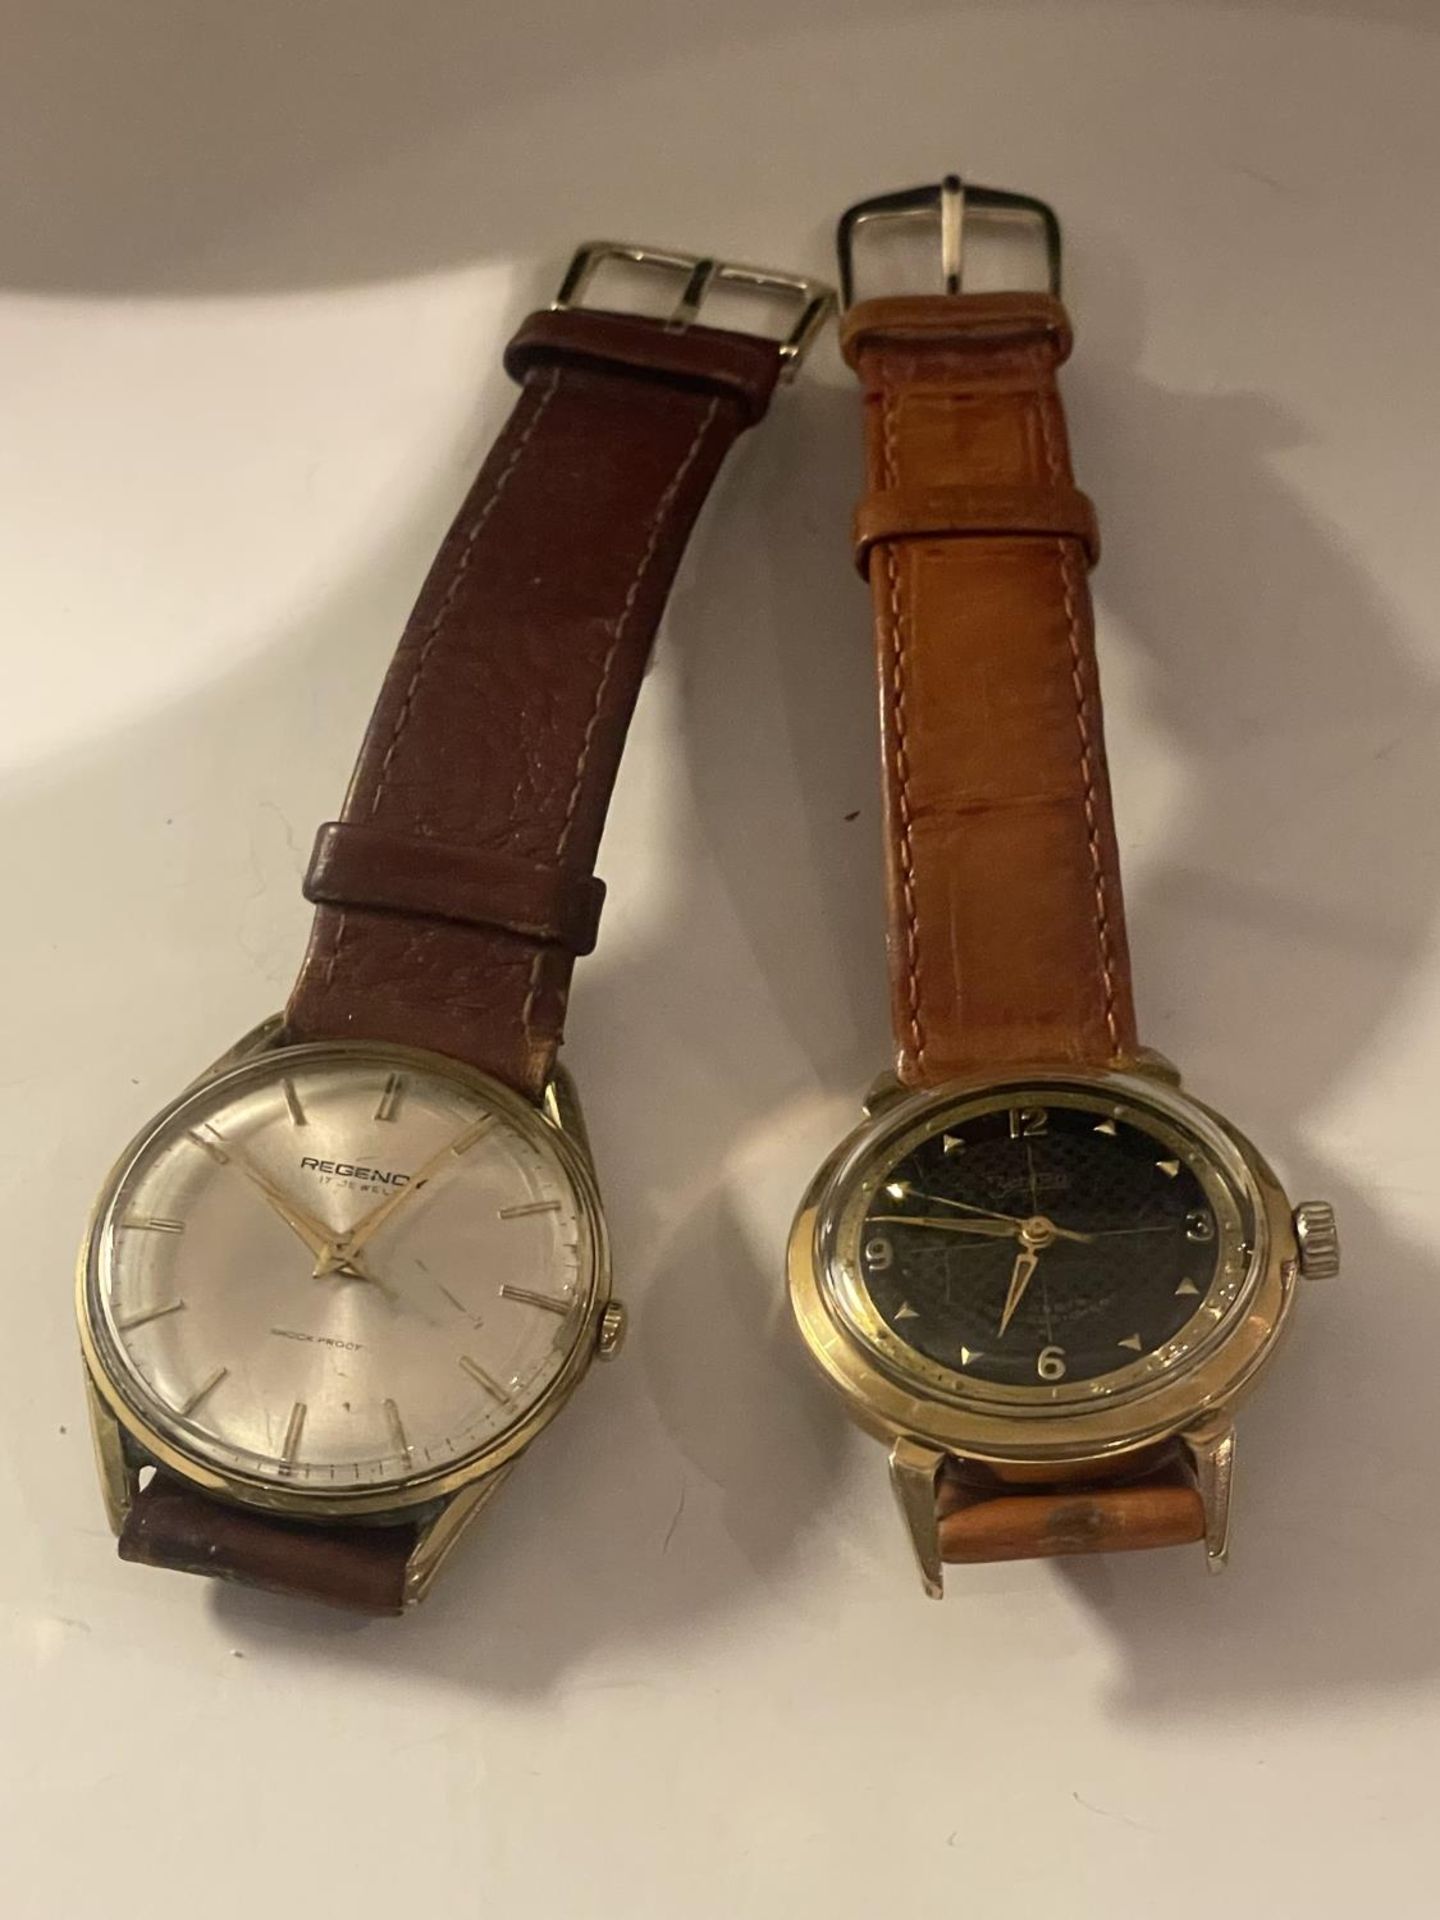 TWO VINTAGE GENTS WRIST WATCHES TO INCLUDE A REGENCY SEEN WORKING BUT NO WARRANTY